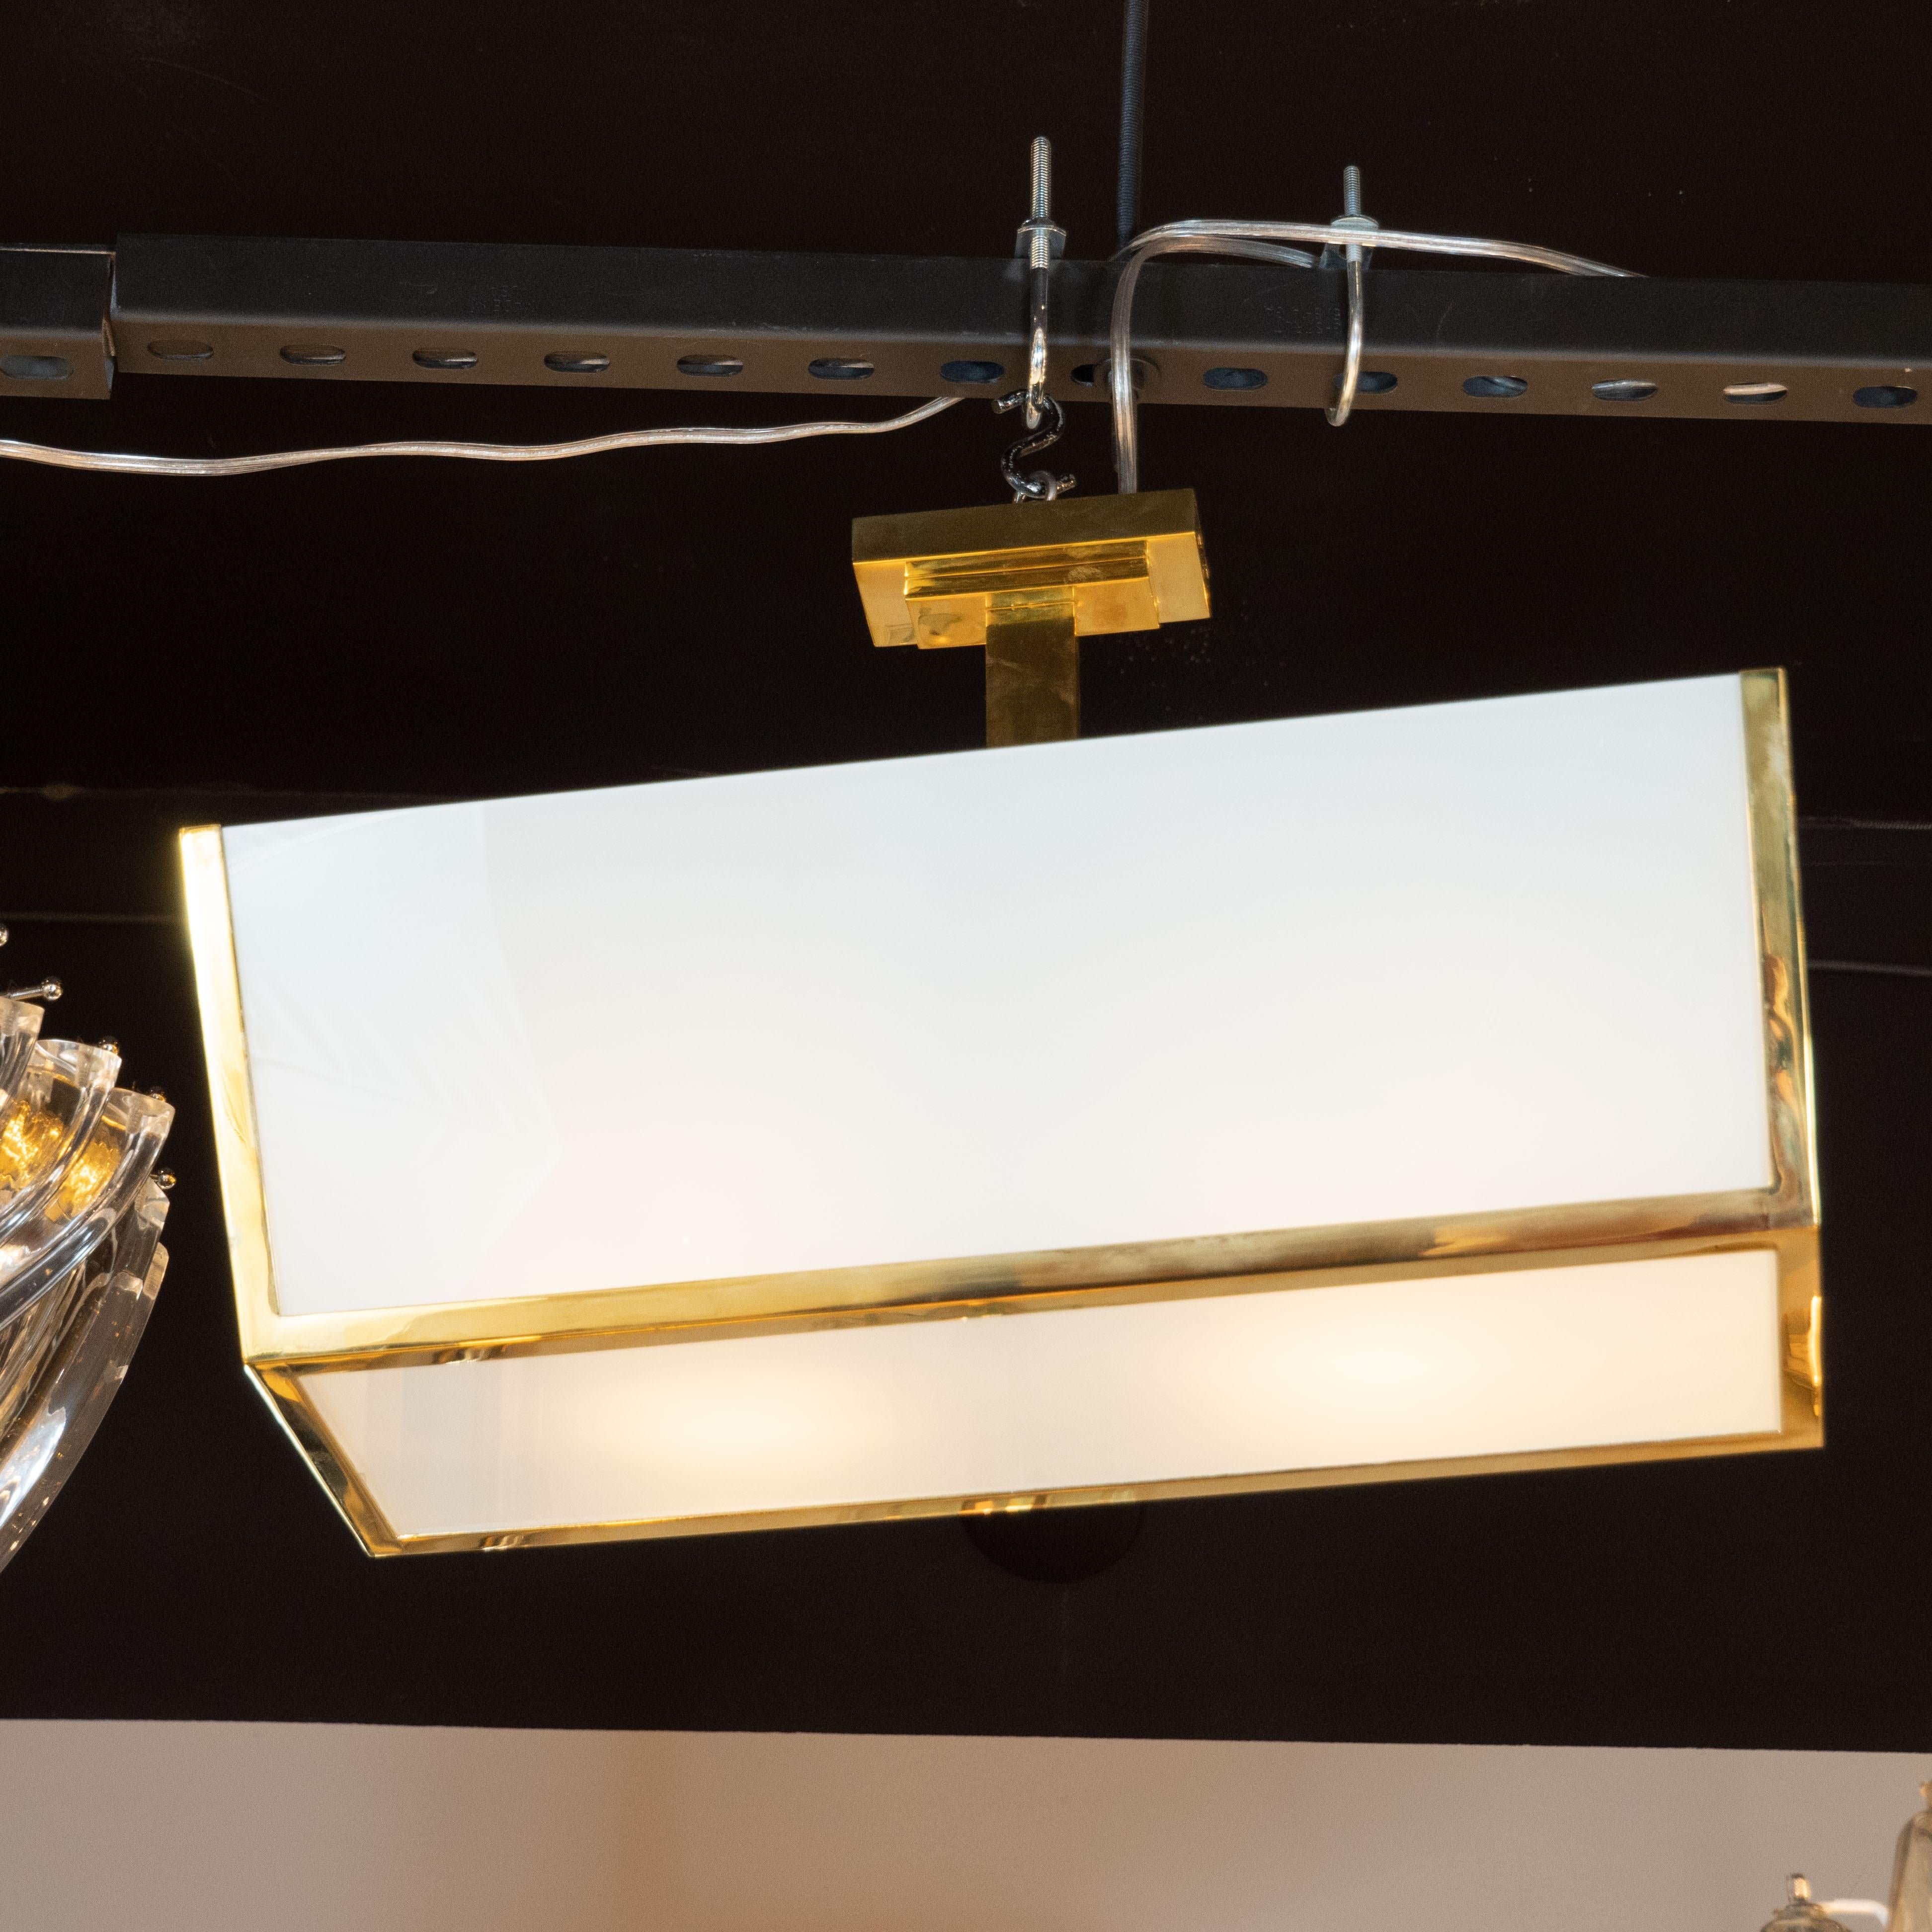 Jean Perzel has been one of the most renowned lighting ateliers in Paris for more than 80 years. This though, is the real deal-original and stunning fixture from circa 1935. With white glass shades housed in a polished brass frame with solid brass